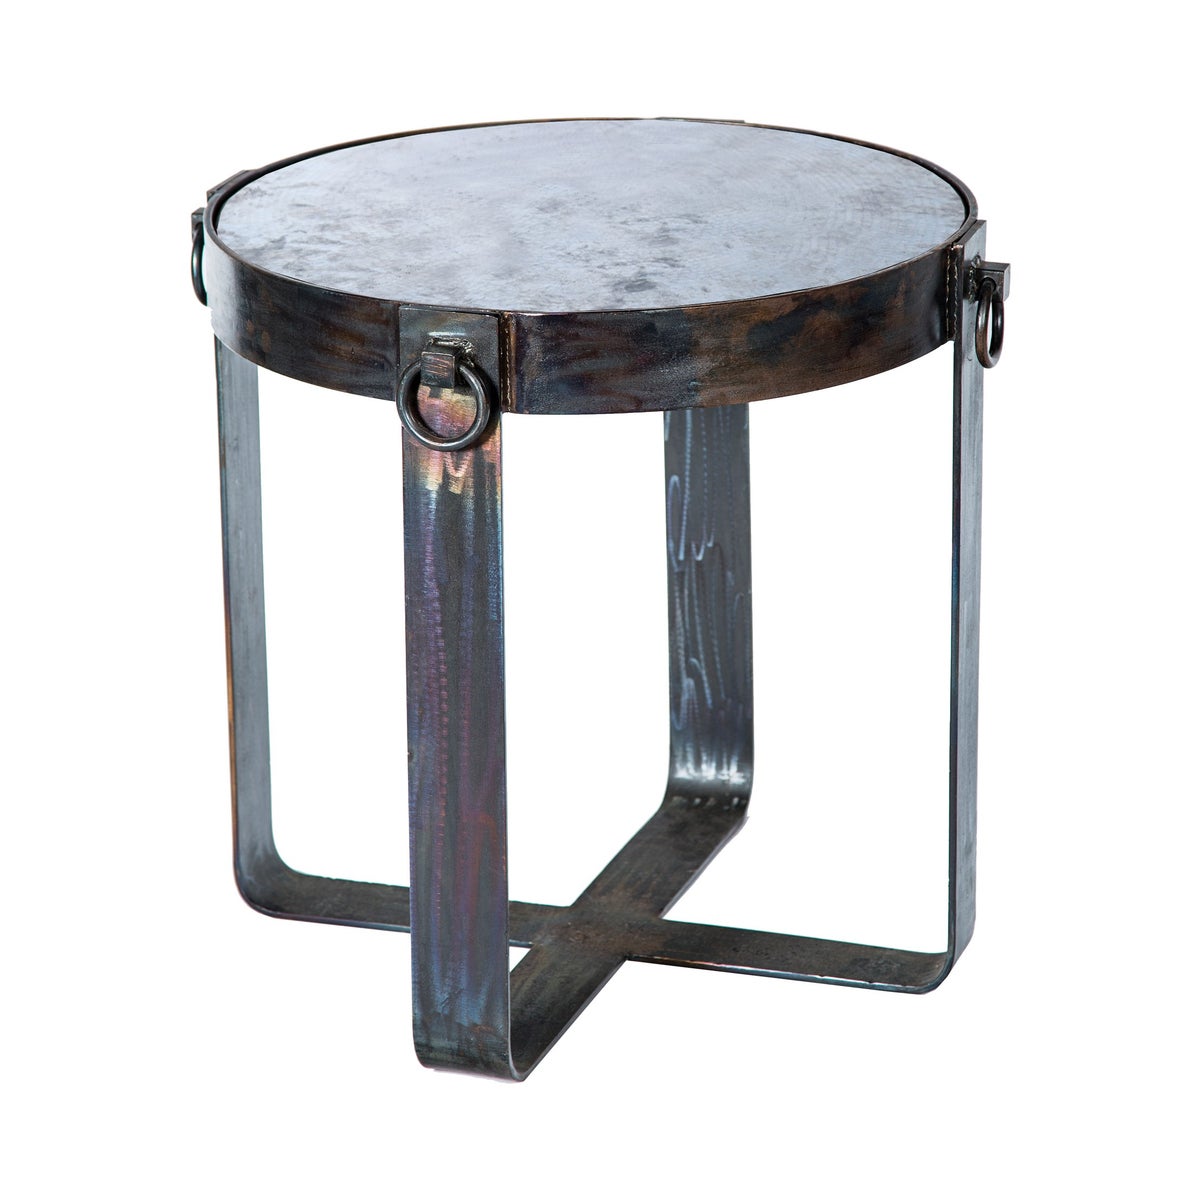 Palmer Side Table Base with Acid Washed Hammered Zinc Top